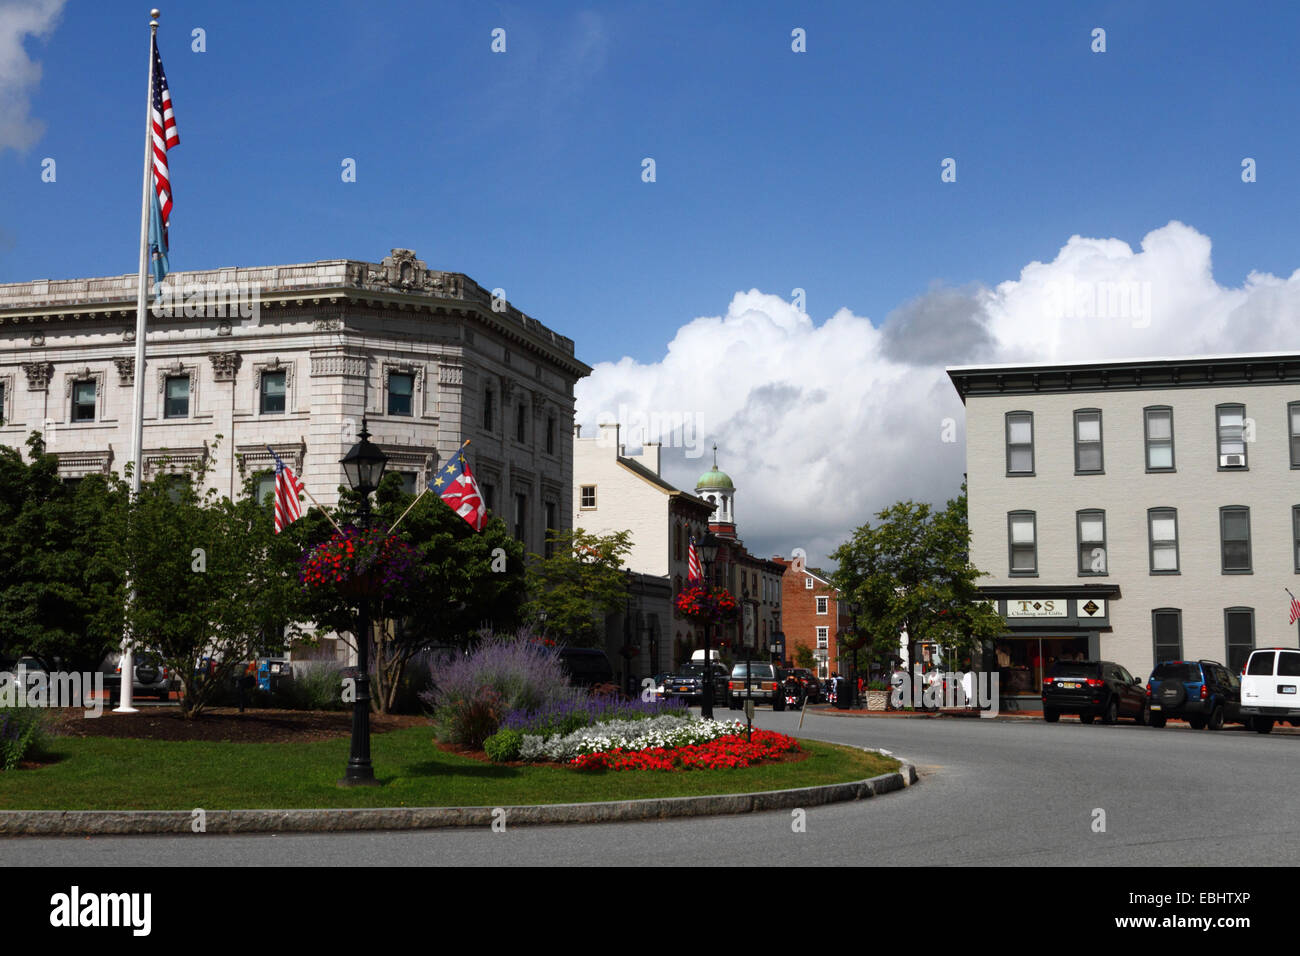 View of Lincoln Square, Gettysburg, Pennsylvania, USA. The flag on the right of the lamp post is the Gettysburg town flag. Stock Photo